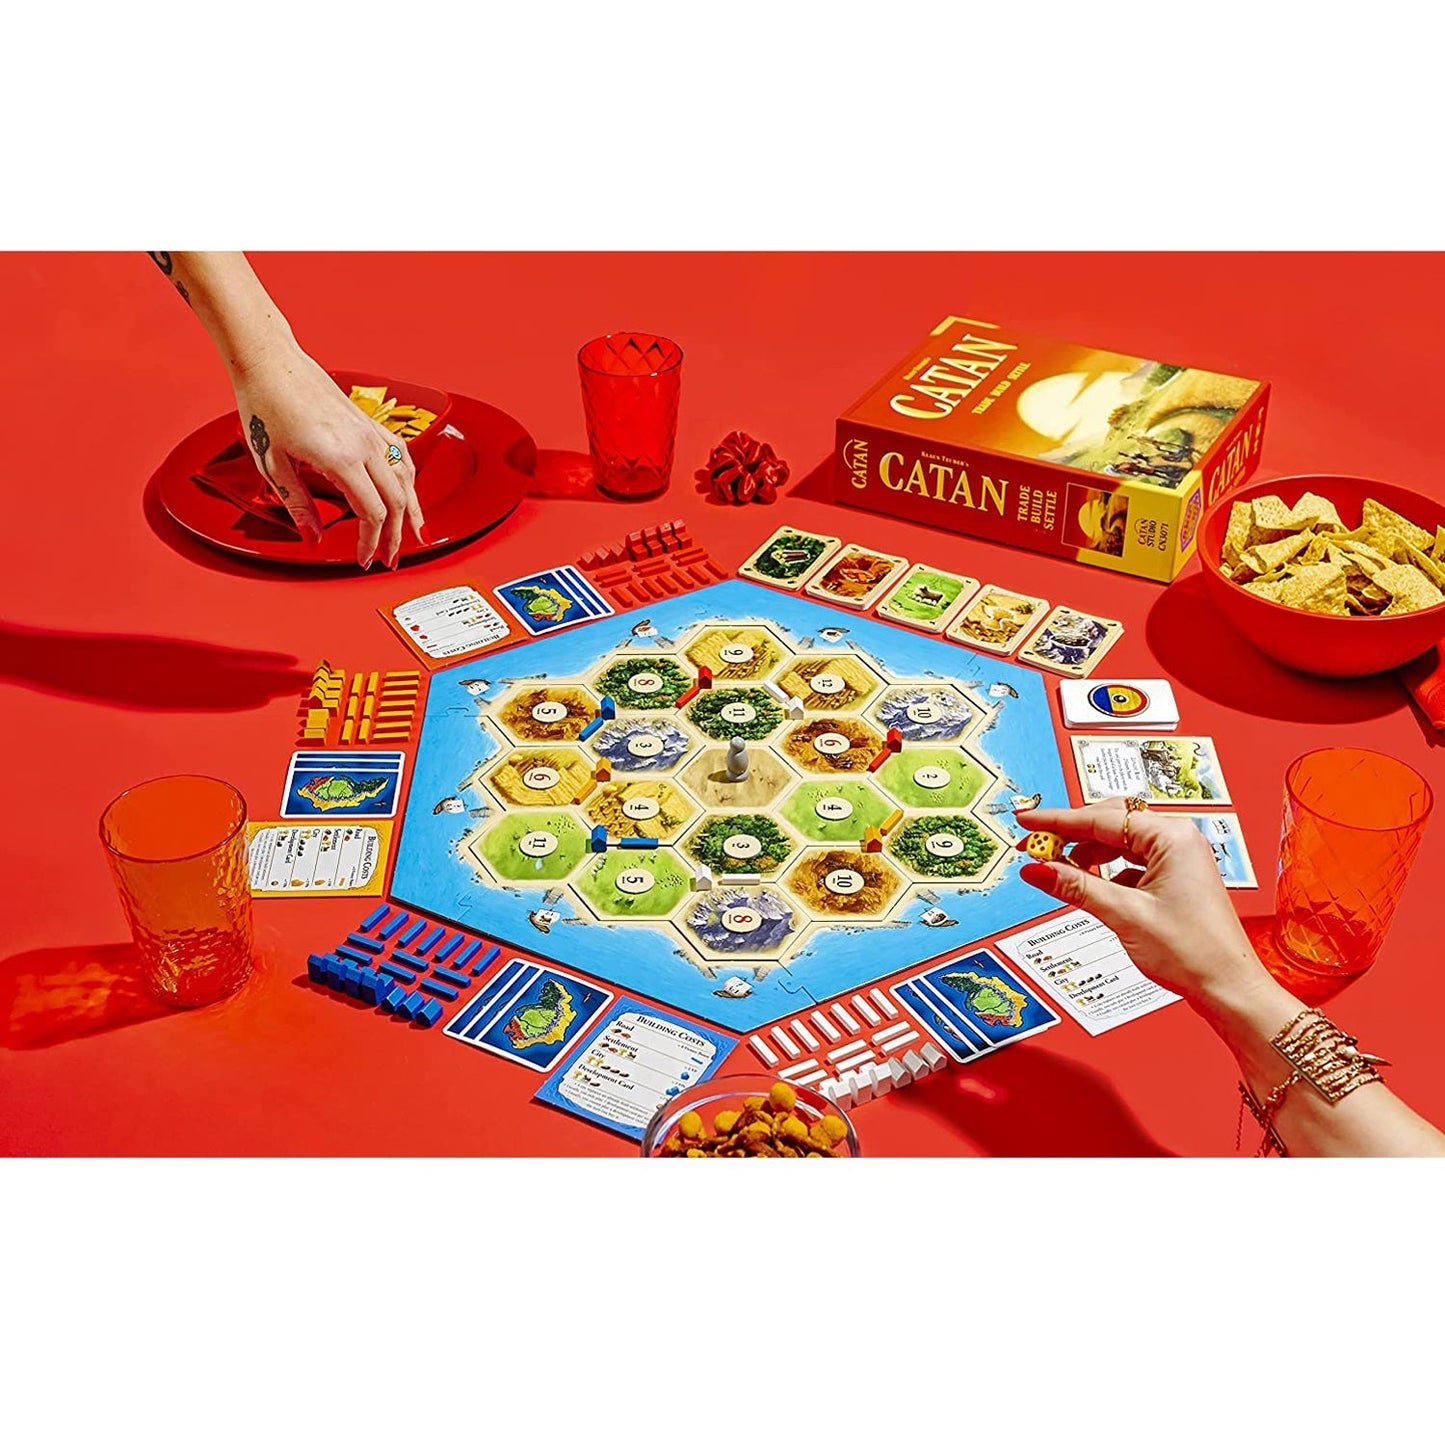 4659 Catan Board Game Extension Allowing a Total of 5 to 6 Players for The Catan Board Game | Family Board Game | Board Game for Adults and Family | Adventure Board Game (Pack of 1) DeoDap